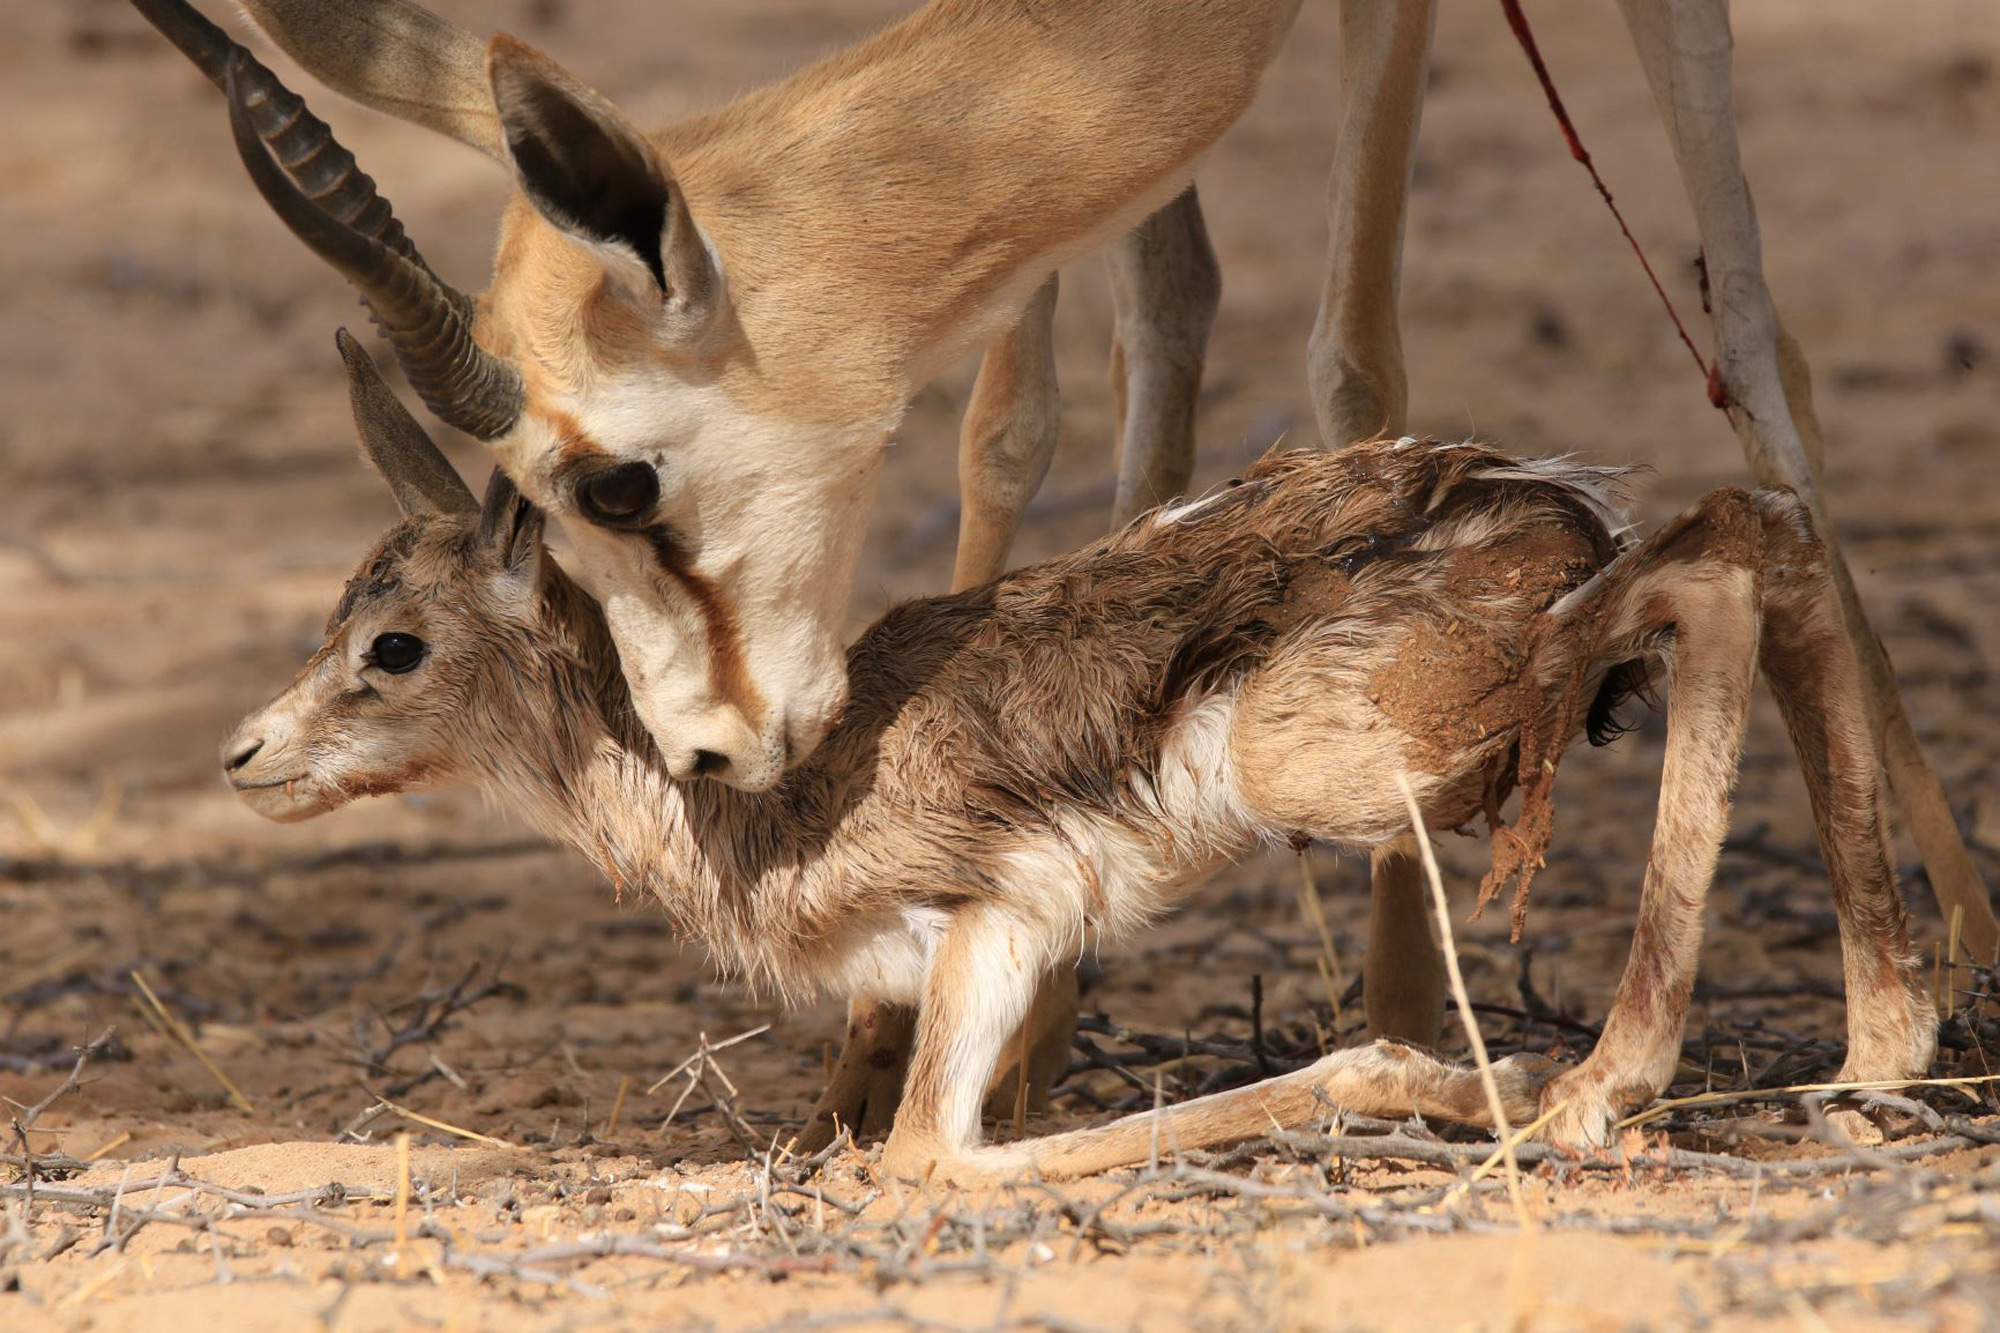 A mother springbok nuzzles her newborn in Kgalagadi Transfrontier Park, South Africa